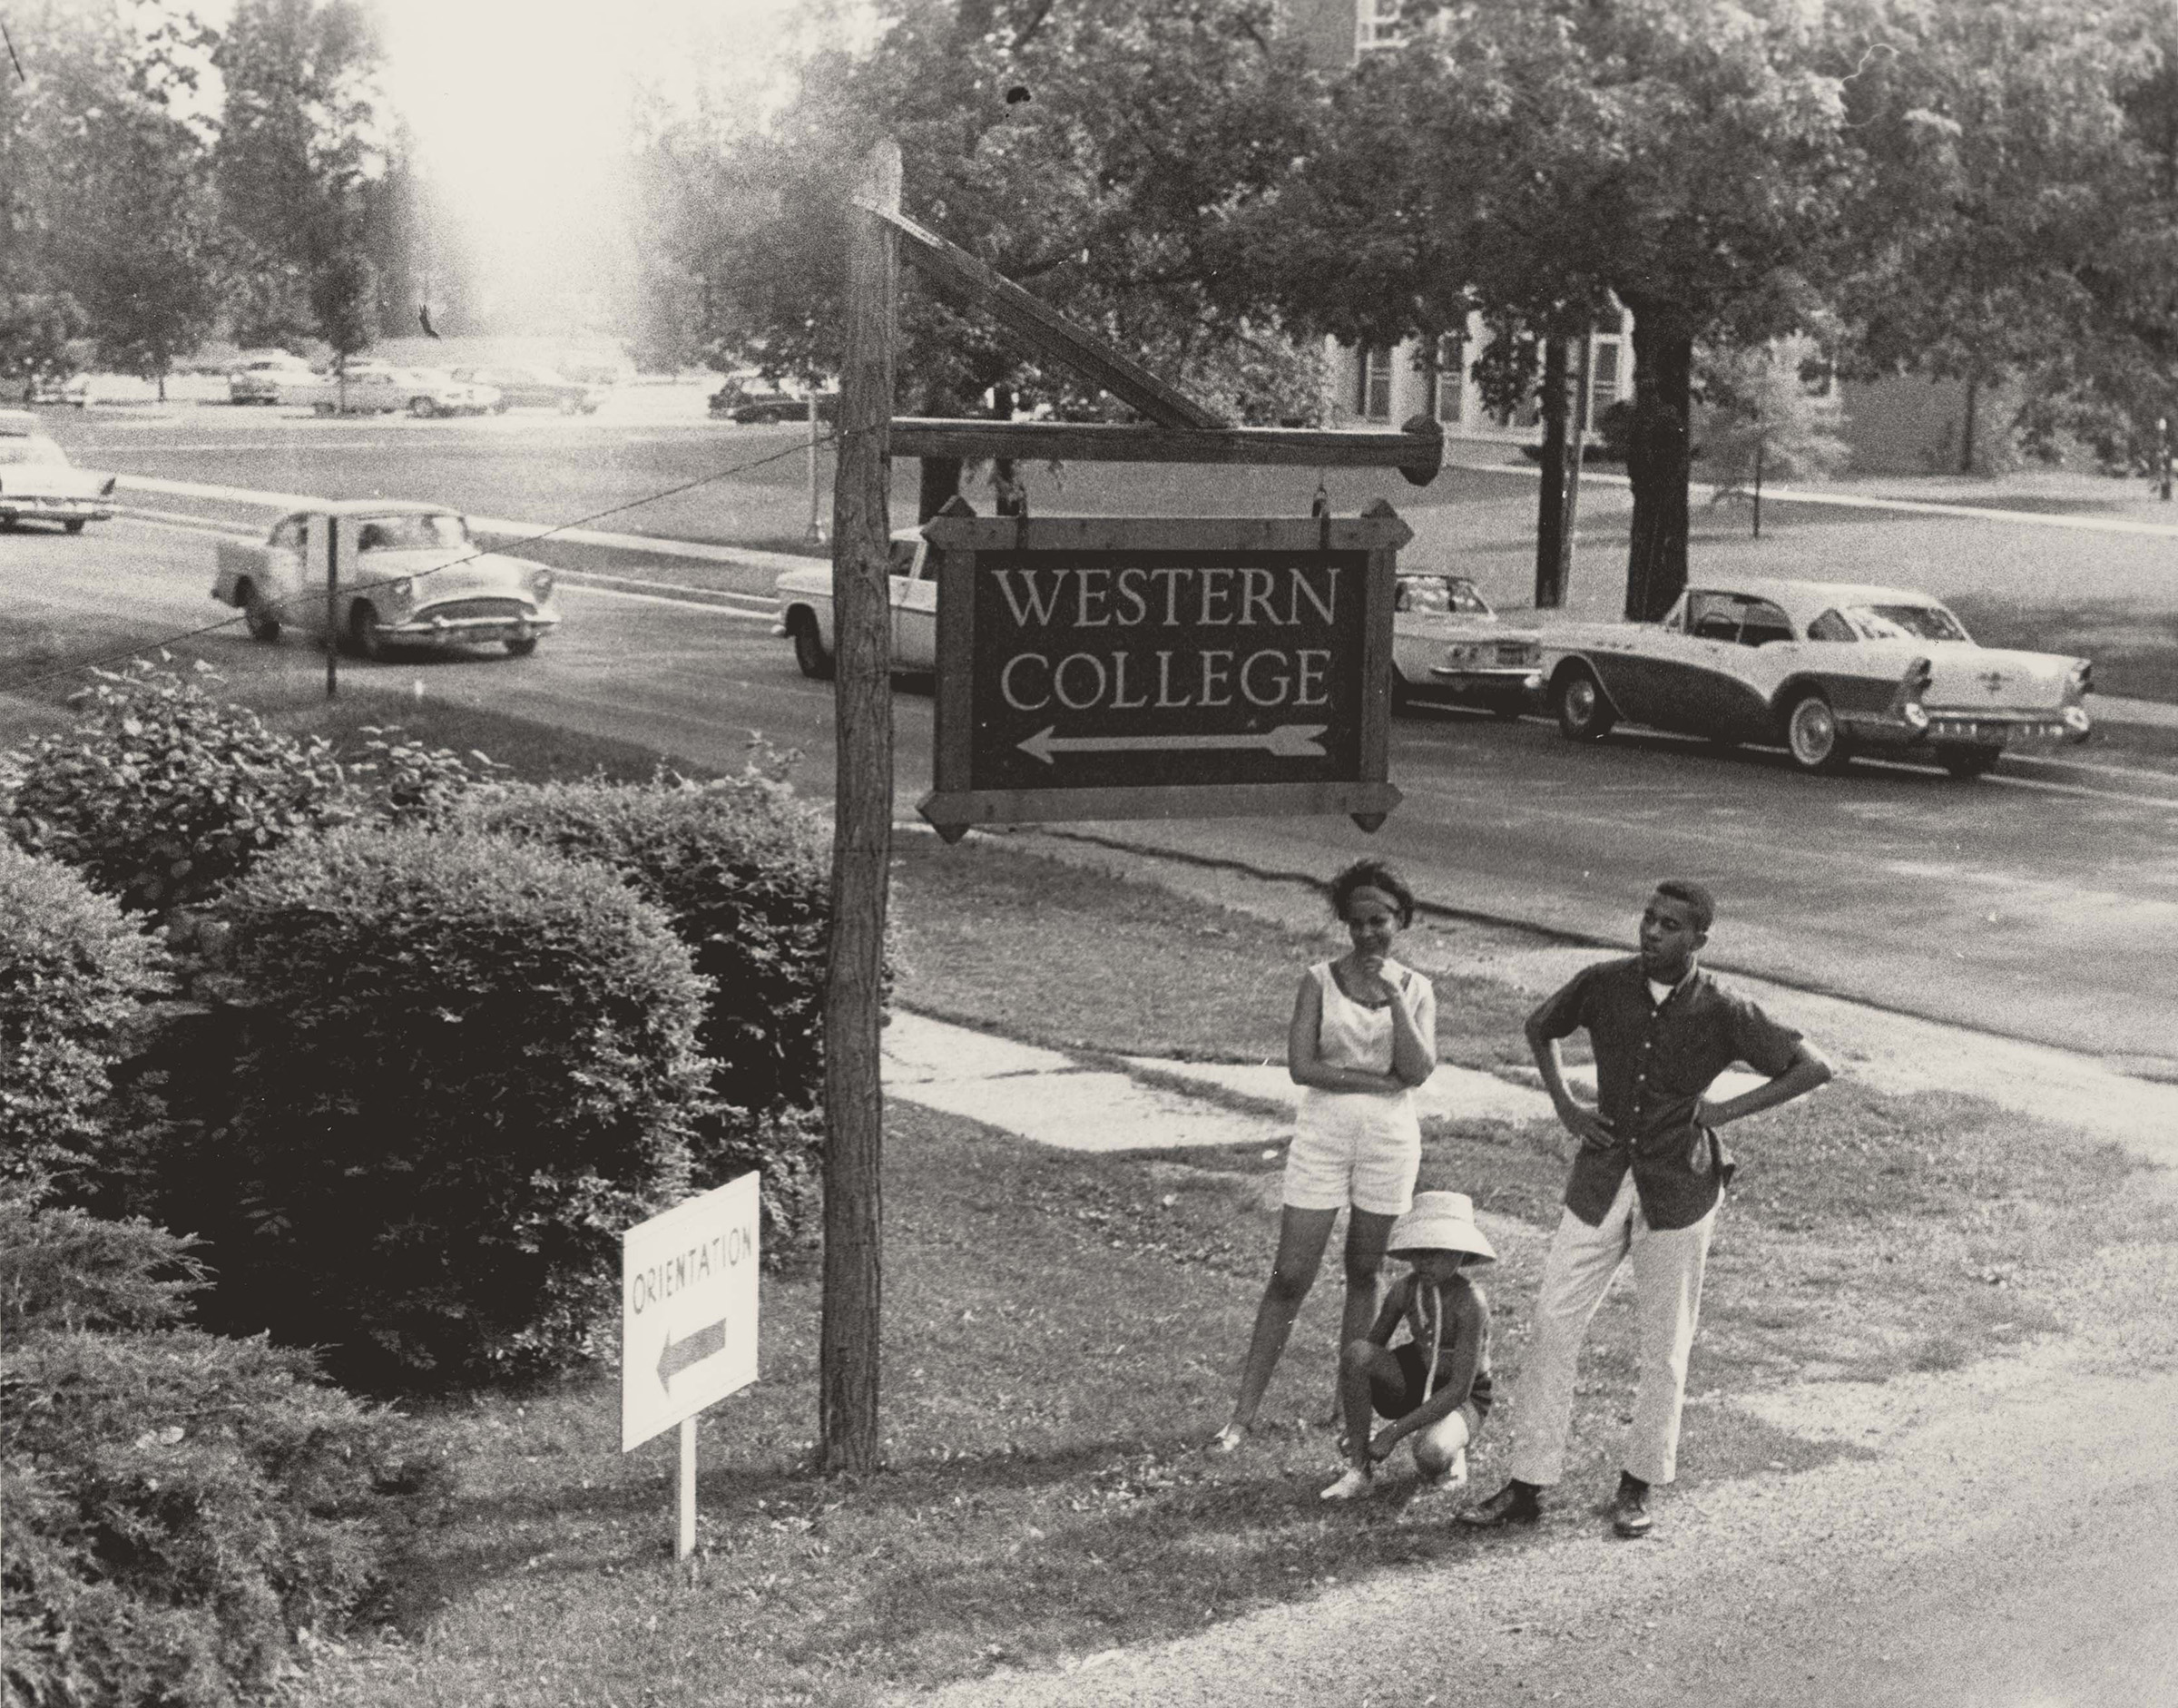 Western College Sign with Three Young People, June 1964. Photograph by Herbert Randall. M351 Herbert Randall Freedom Summer Photographs, Historical Manuscripts, The University of Southern Mississippi.